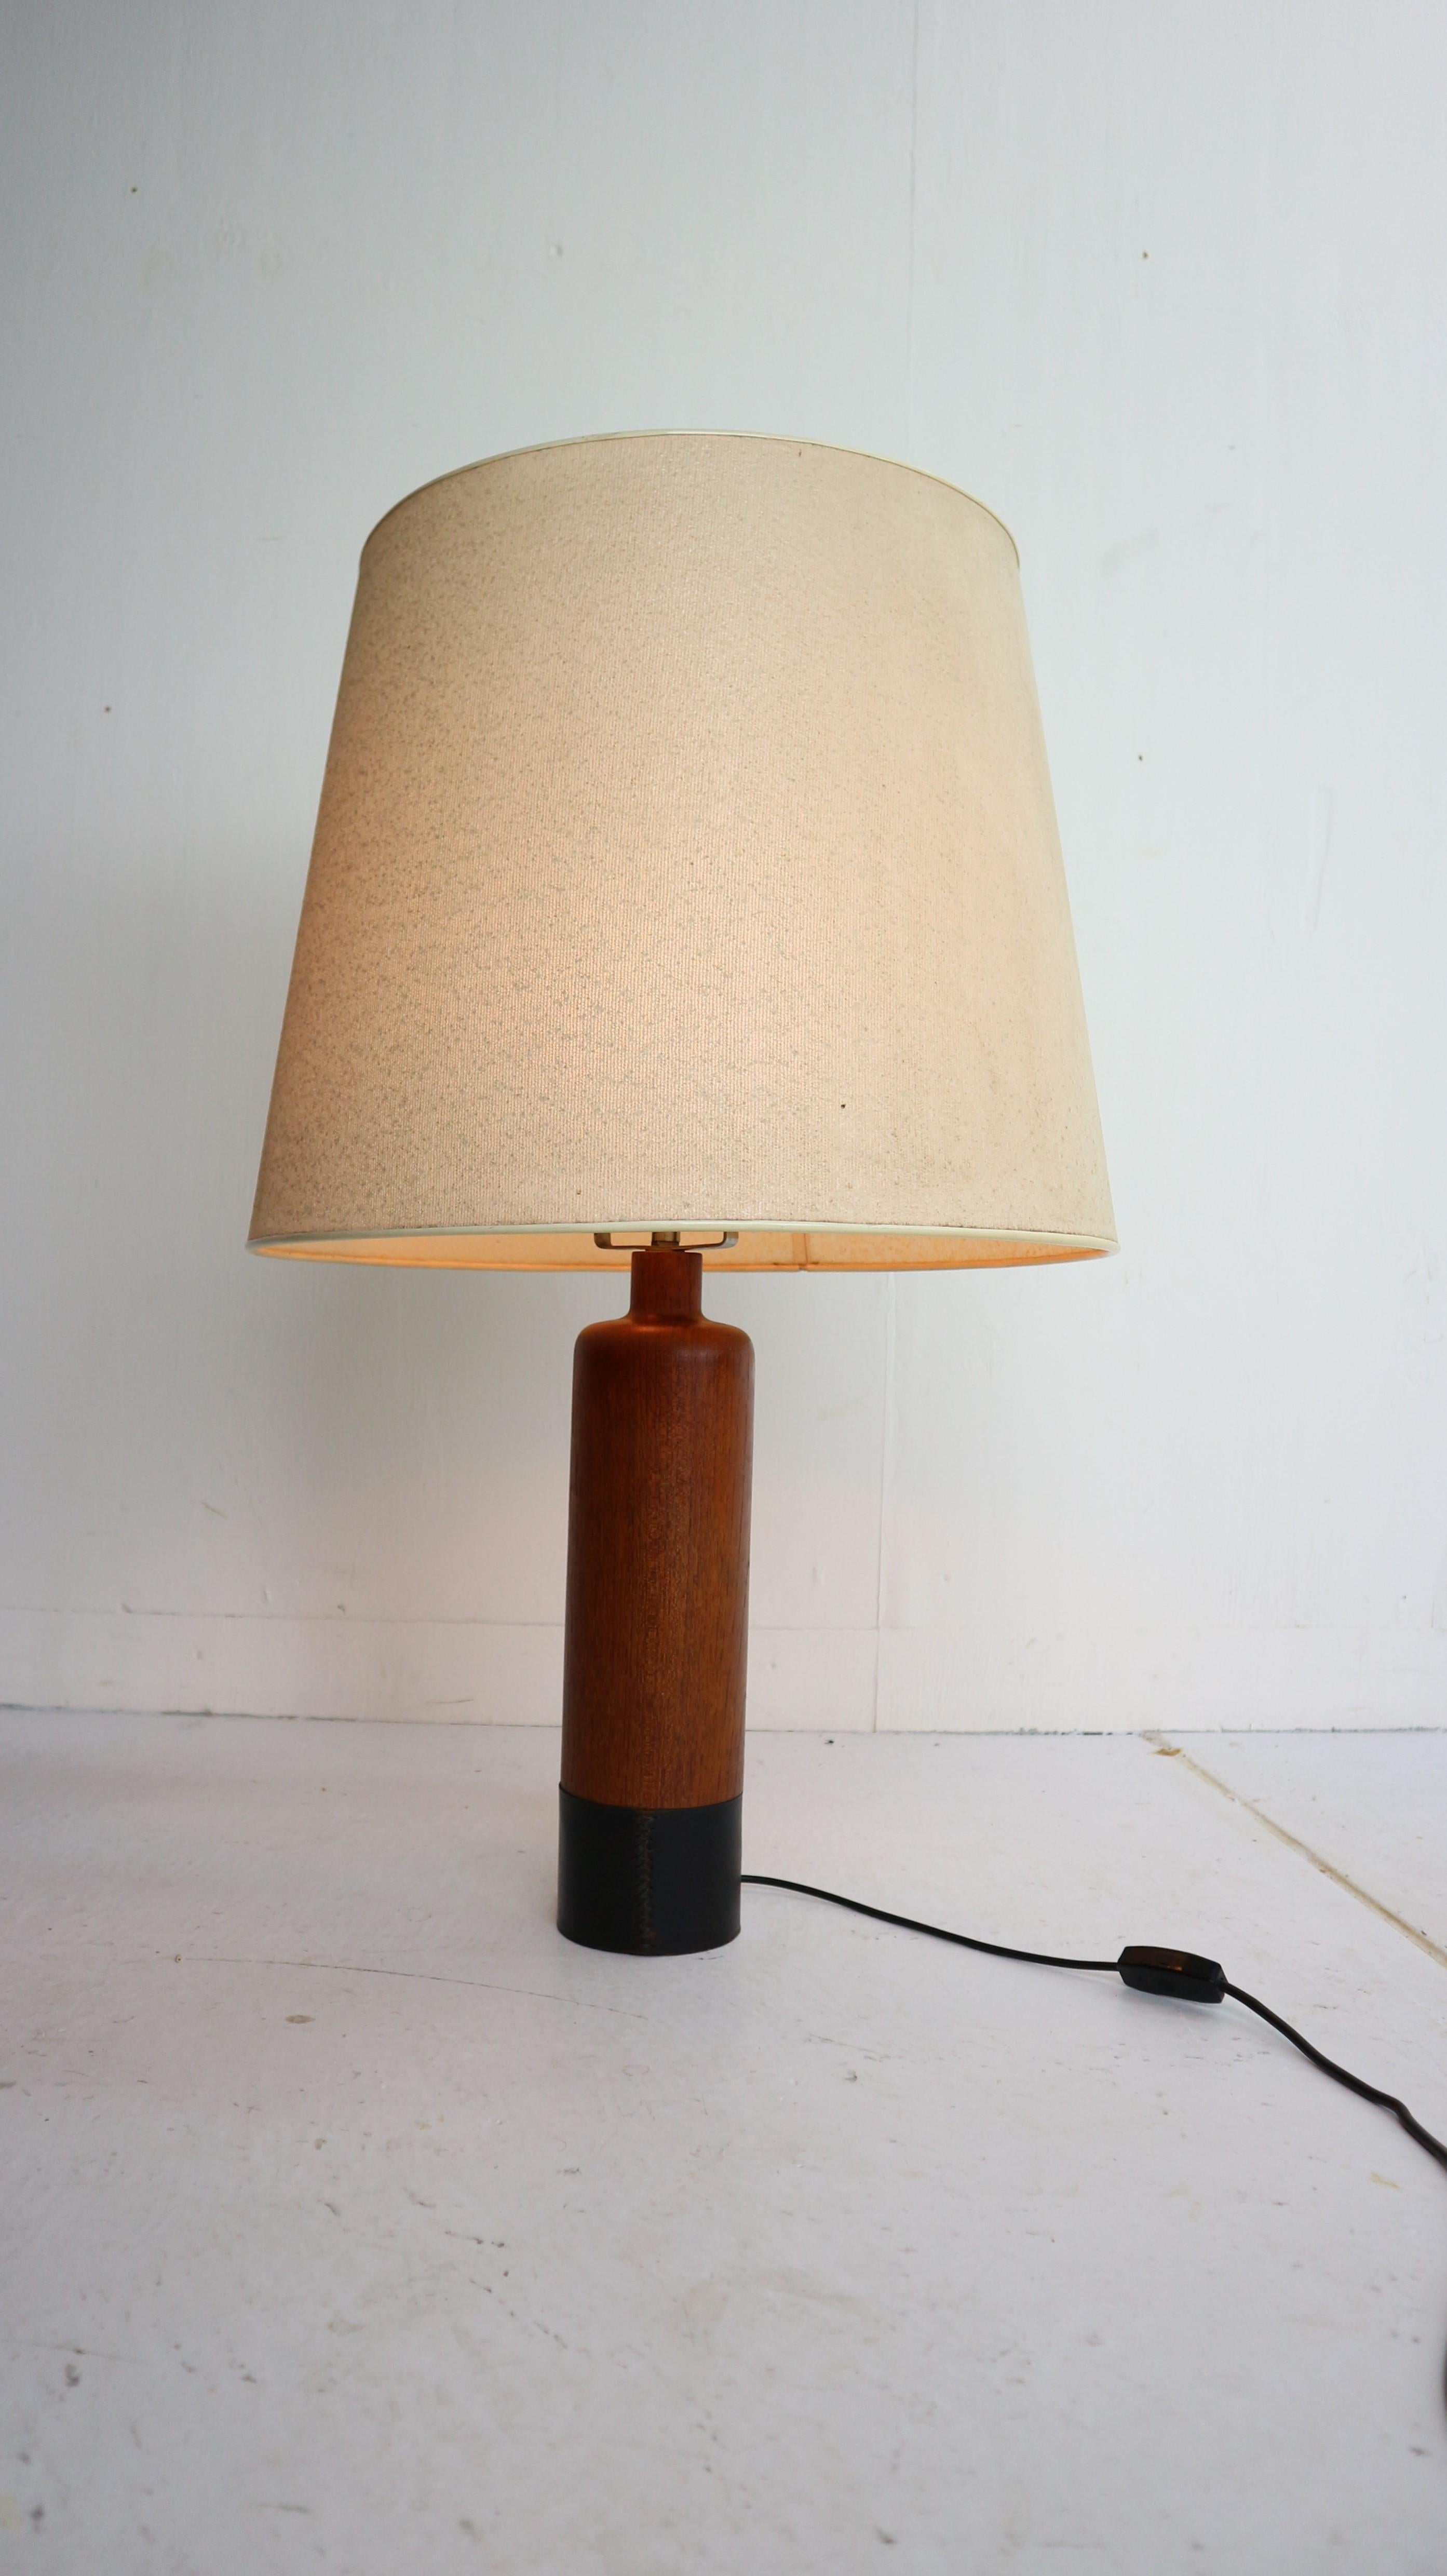 Cylindrical table lamp by ESA, Denmark, circa 1960.
Solid teak feed complemented by a black-leather wrapped base. 
Two lamp sockets and the original vintage shade.
 